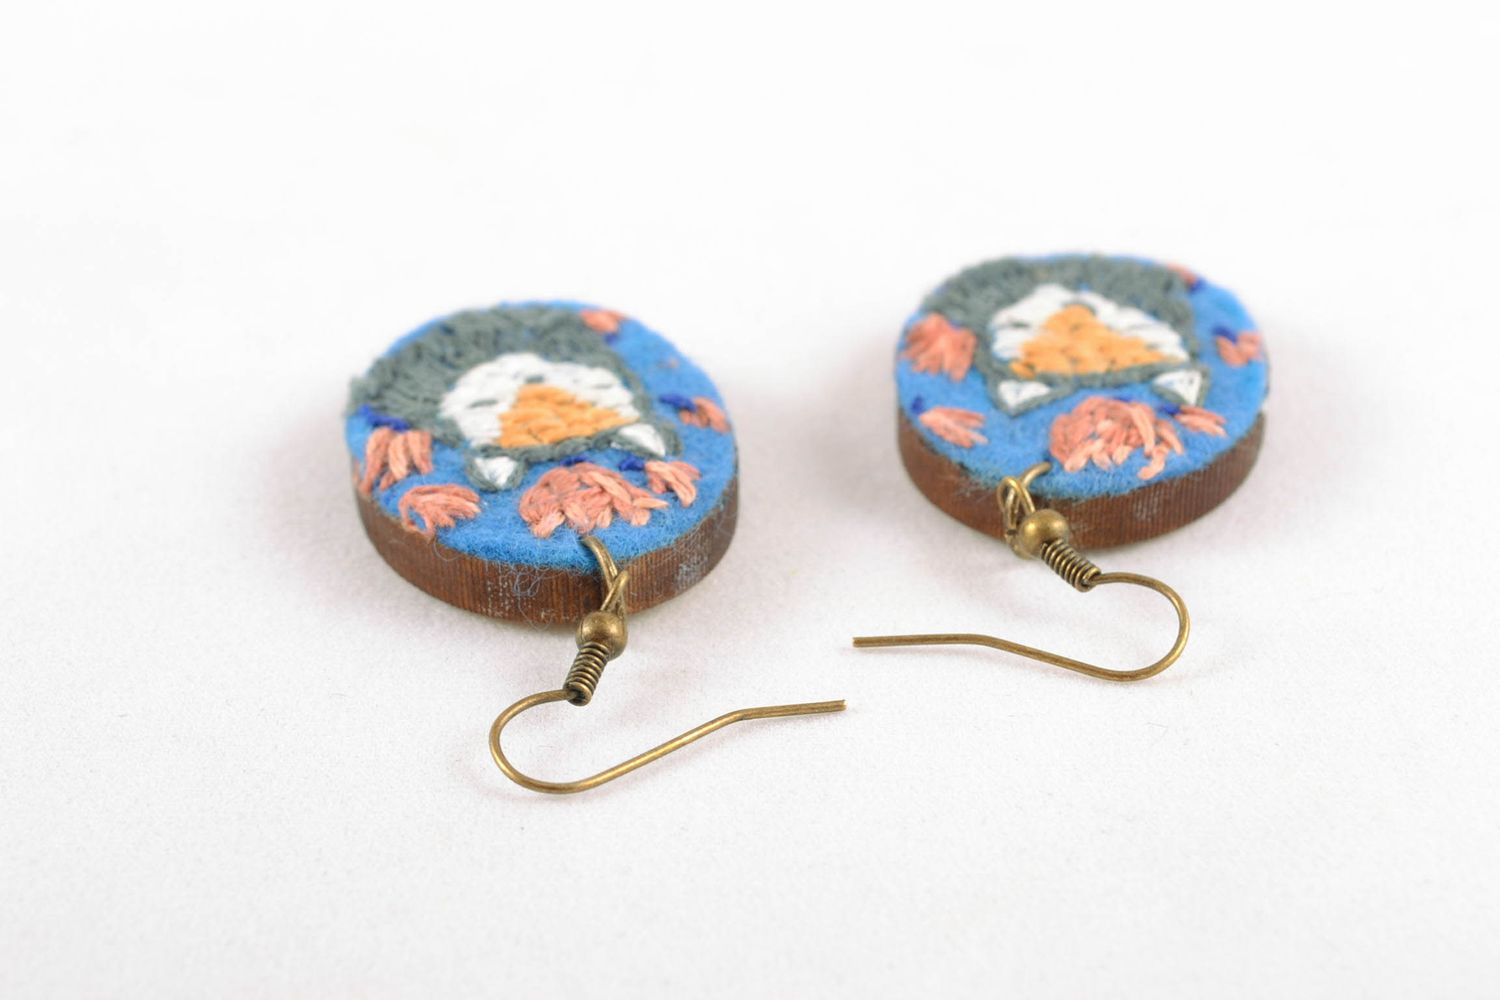 Handmade wooden and felt earrings with satin stitch embroidery photo 4